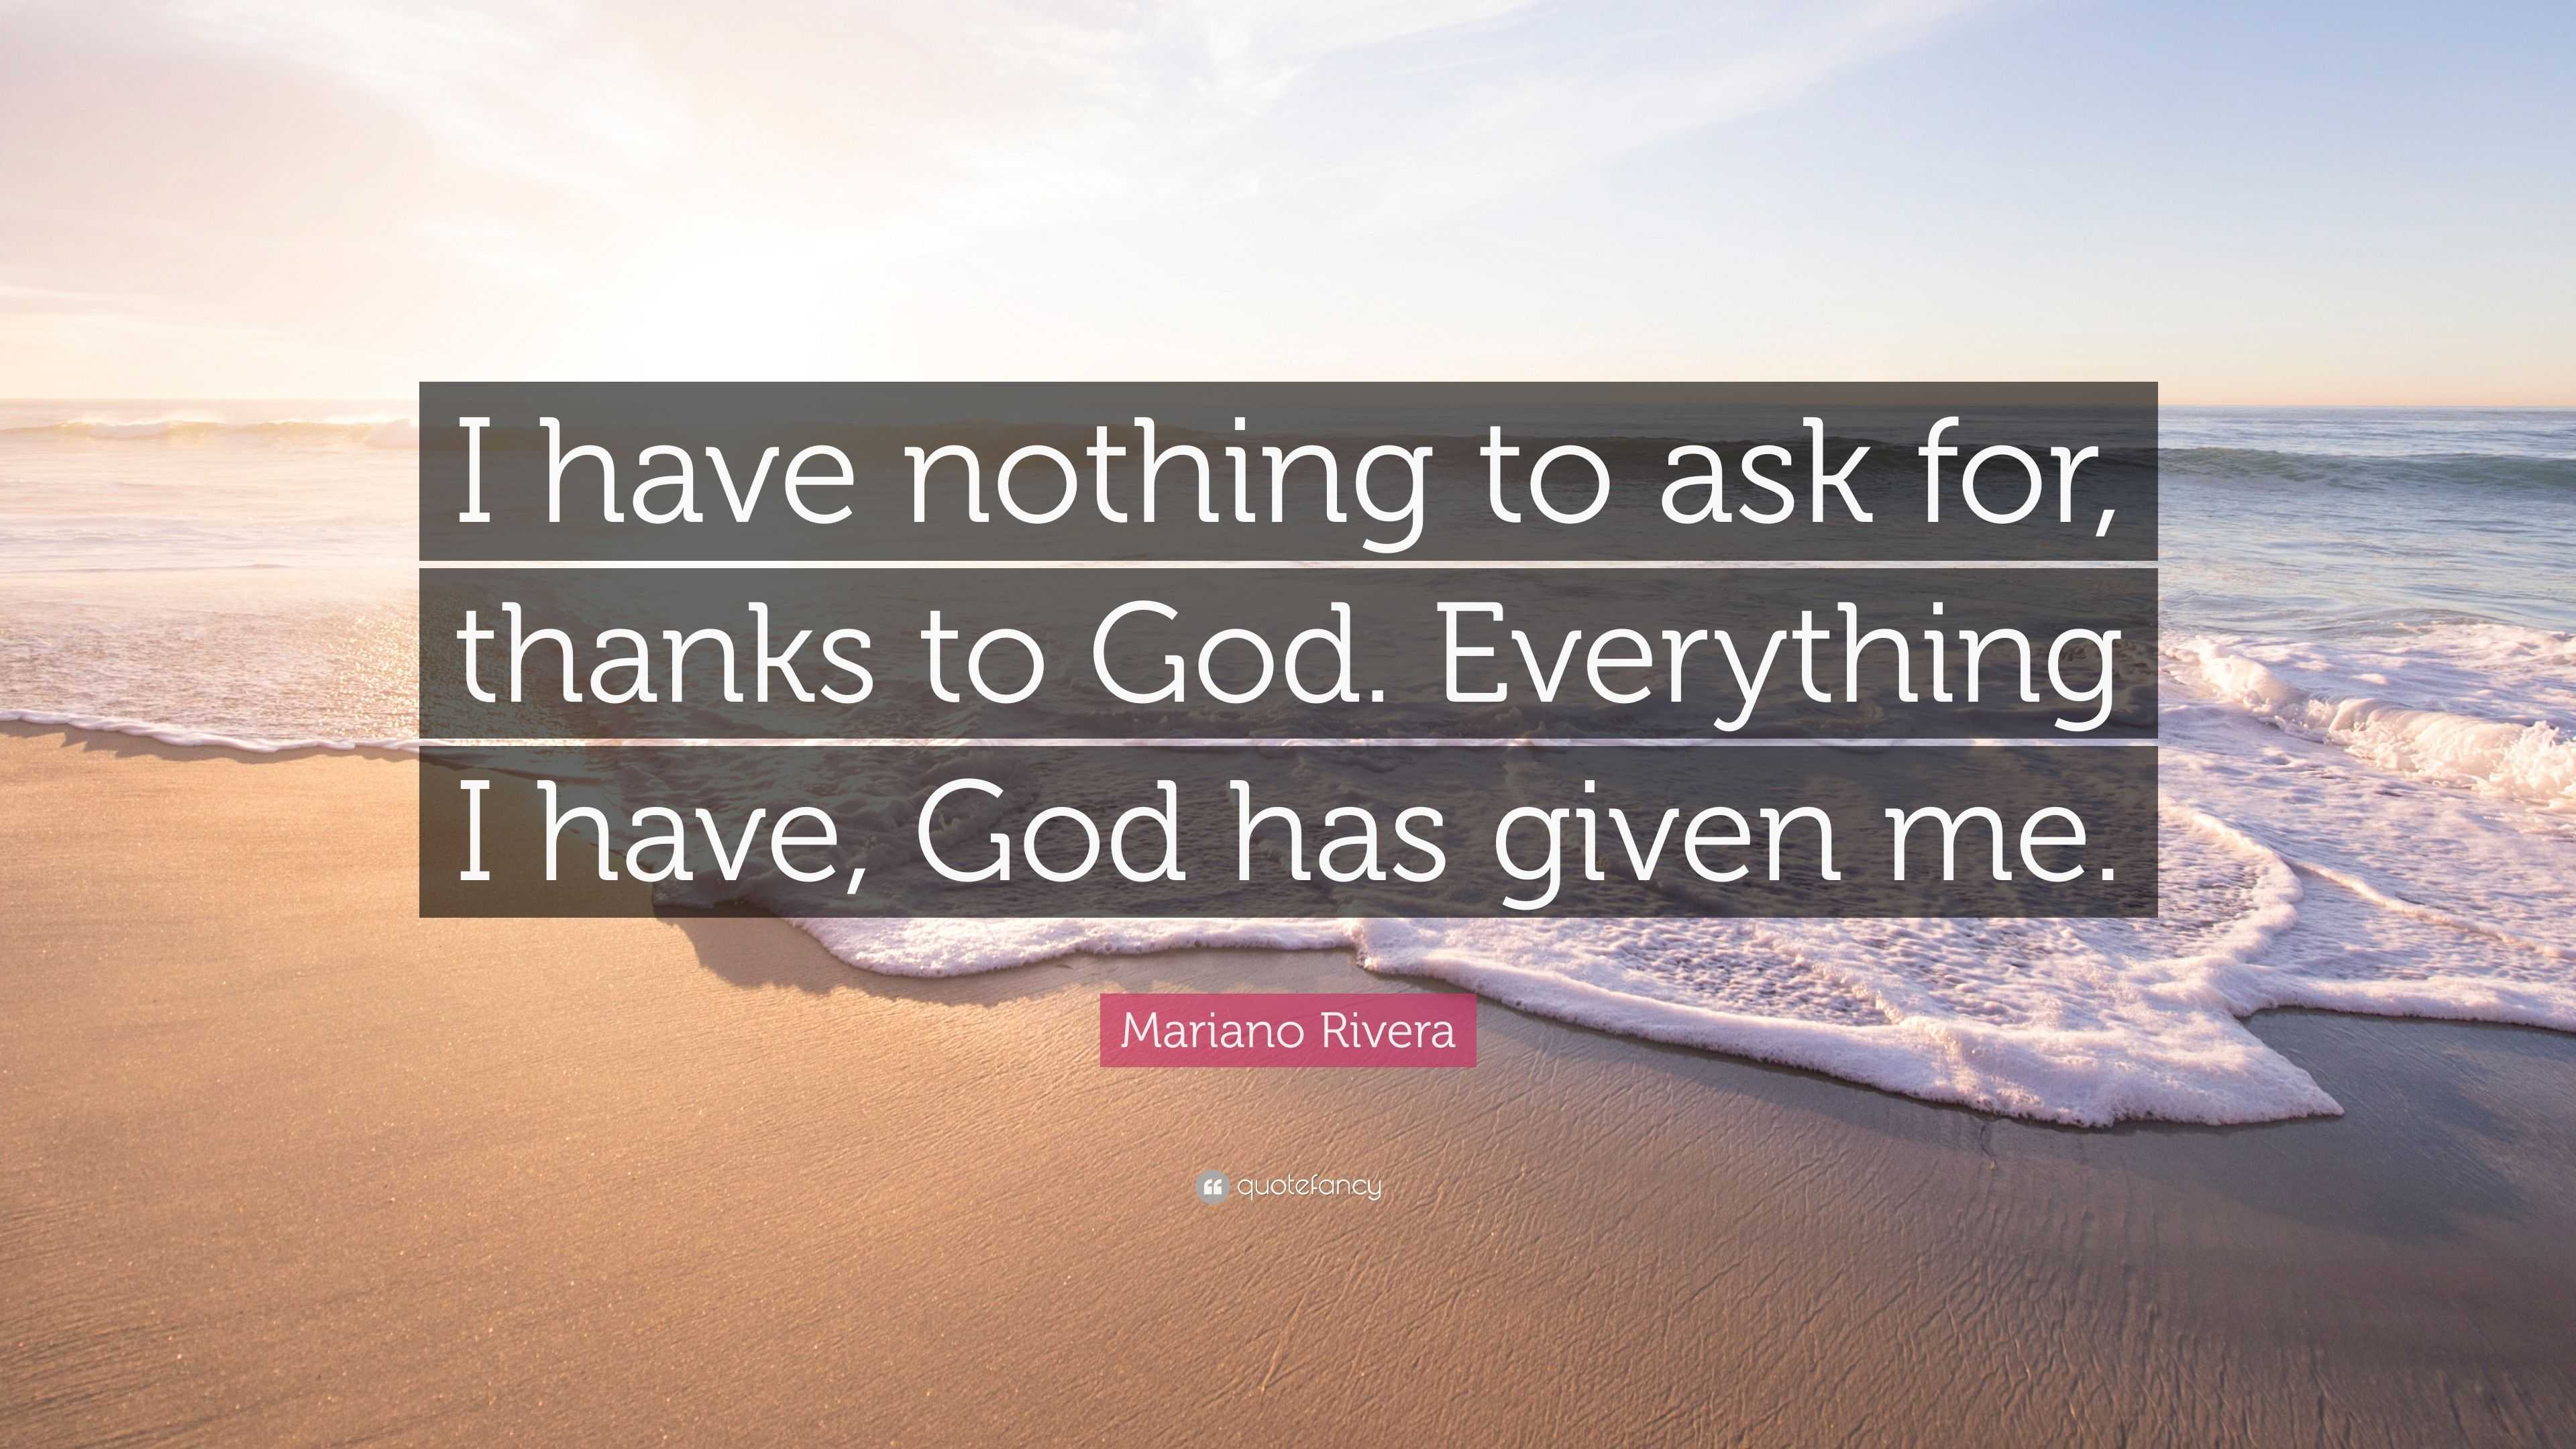 Mariano Rivera - I have nothing to ask for, thanks to God.